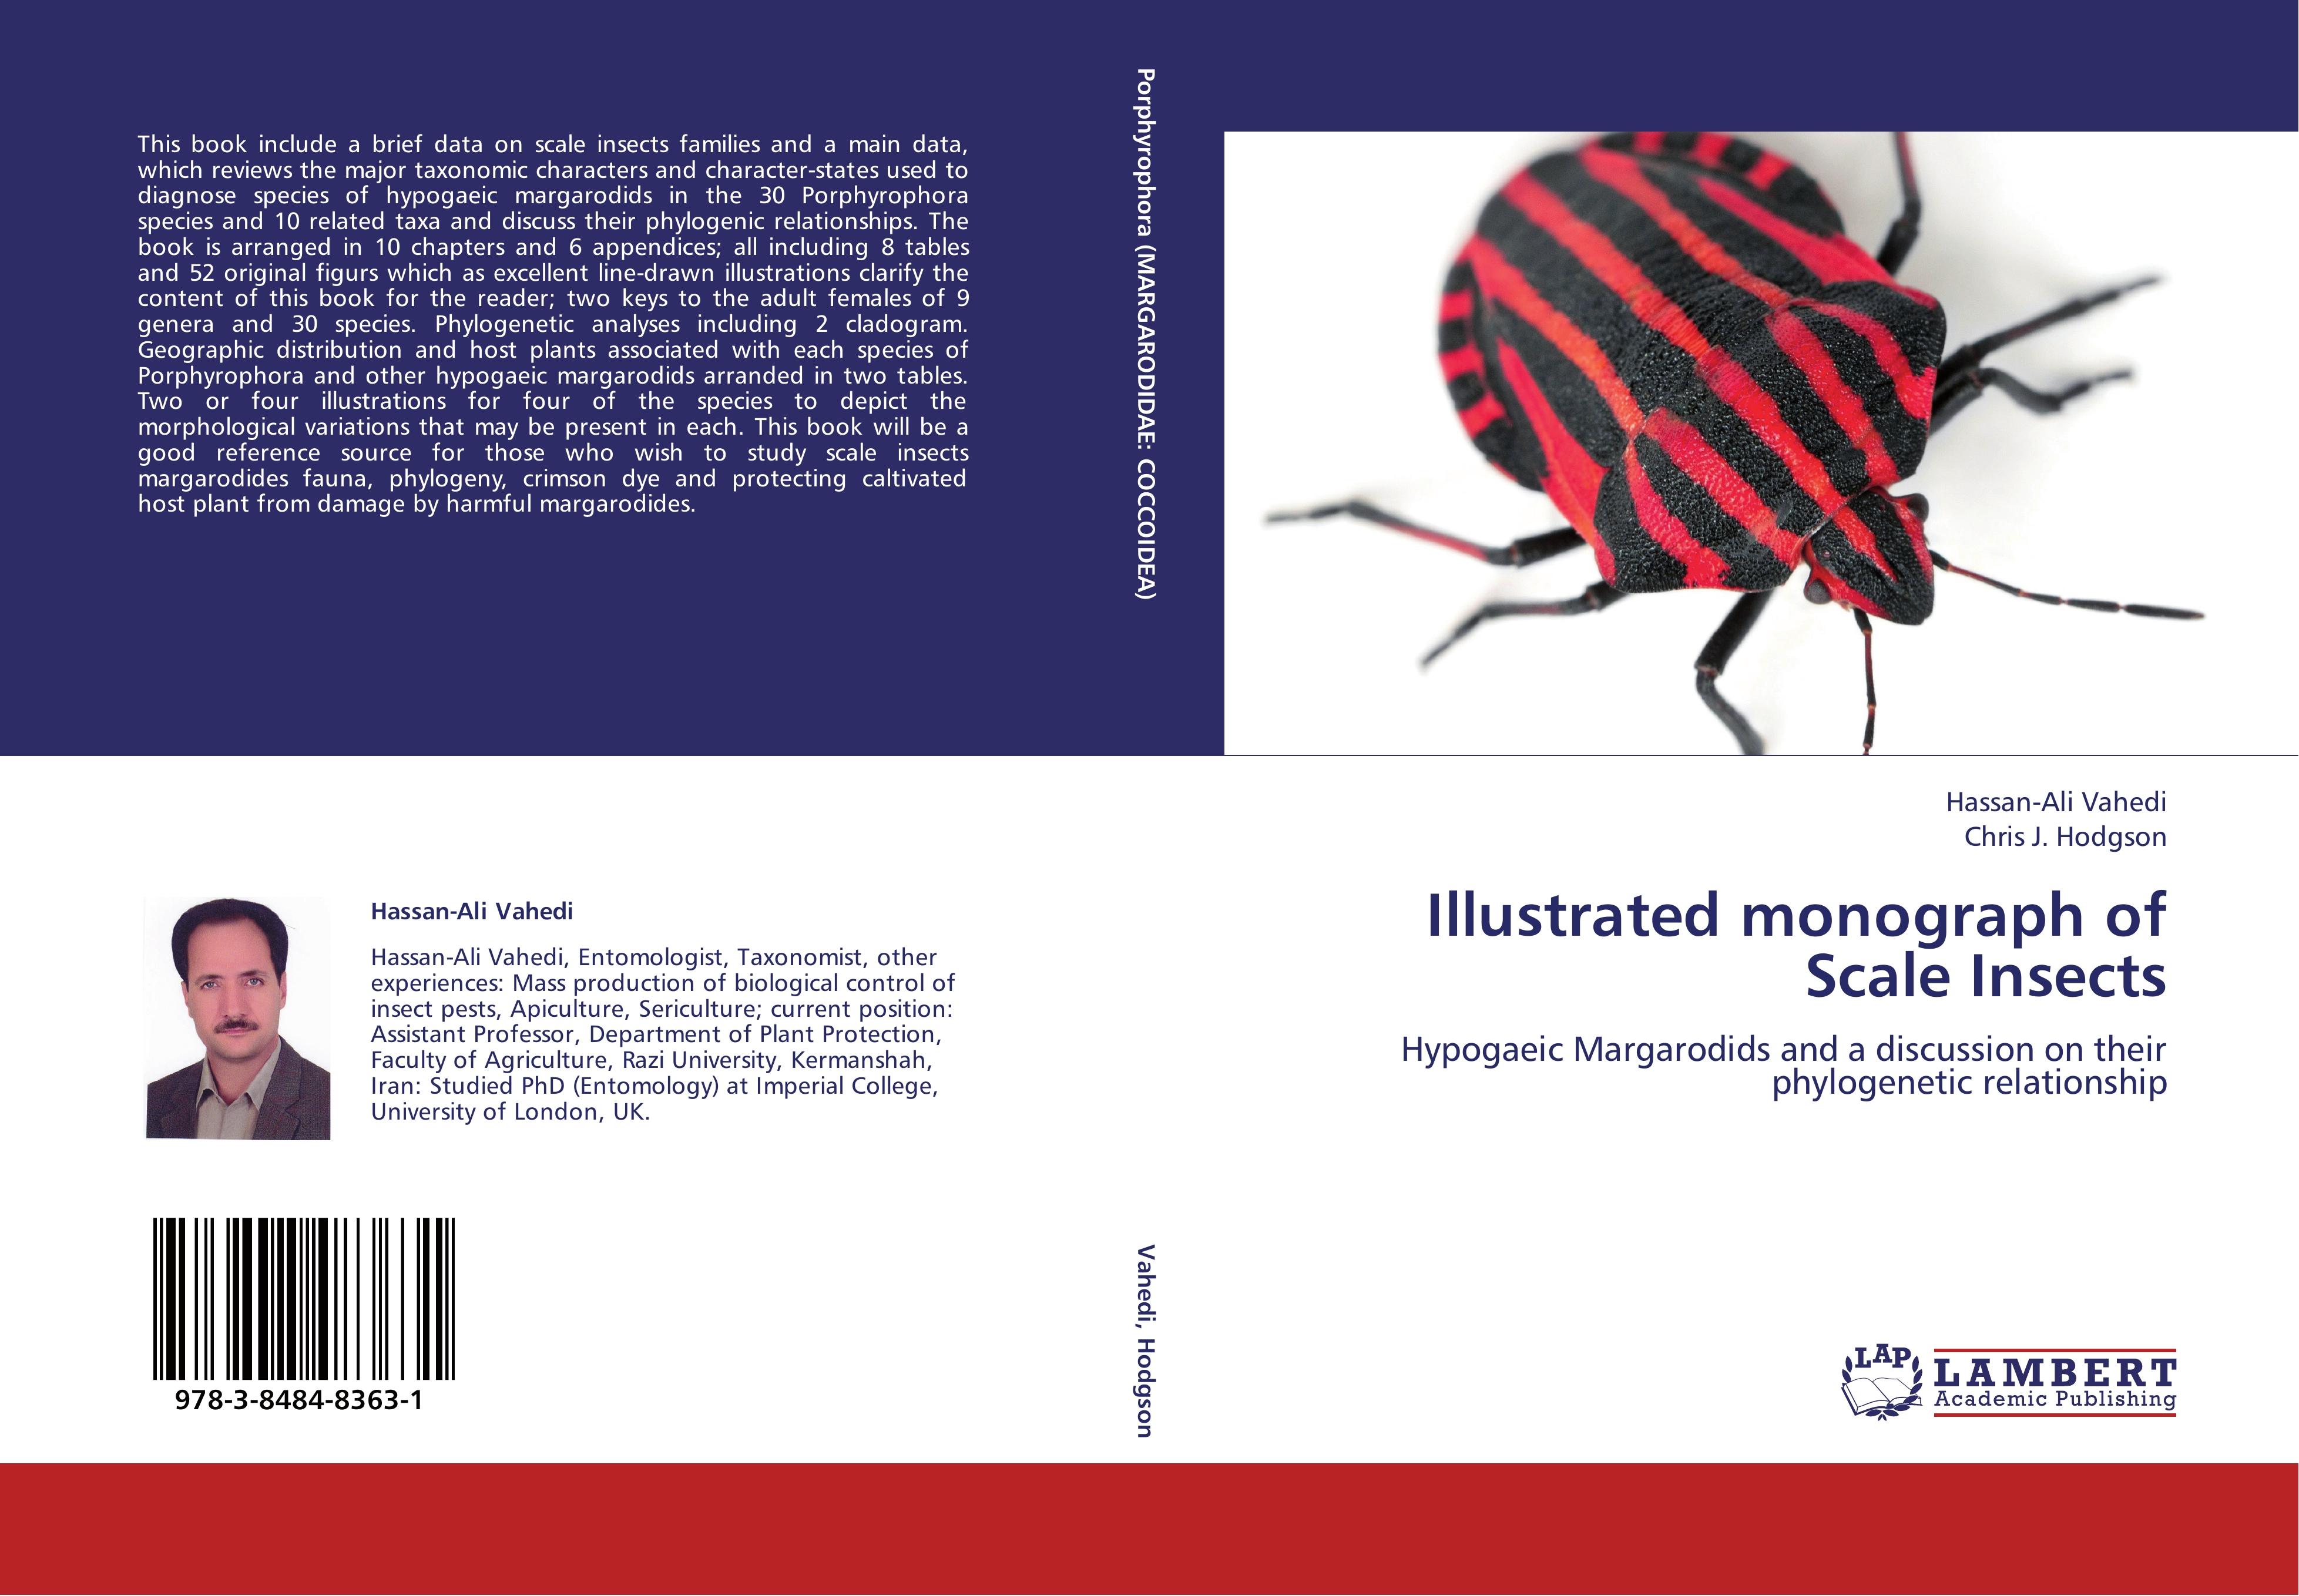 ILLUSTRATED MONOGRAPH OF SCALE INSECTS / HYPOGAEIC MARGARODIDS AND A DISCUSSION ON THEIR PHYLOGENETIC RELATIONSHIPS / Hassan-Ali Vahedi (u. a.) / Taschenbuch / Paperback / 356 S. / Englisch / 2012 - Vahedi, Hassan-Ali